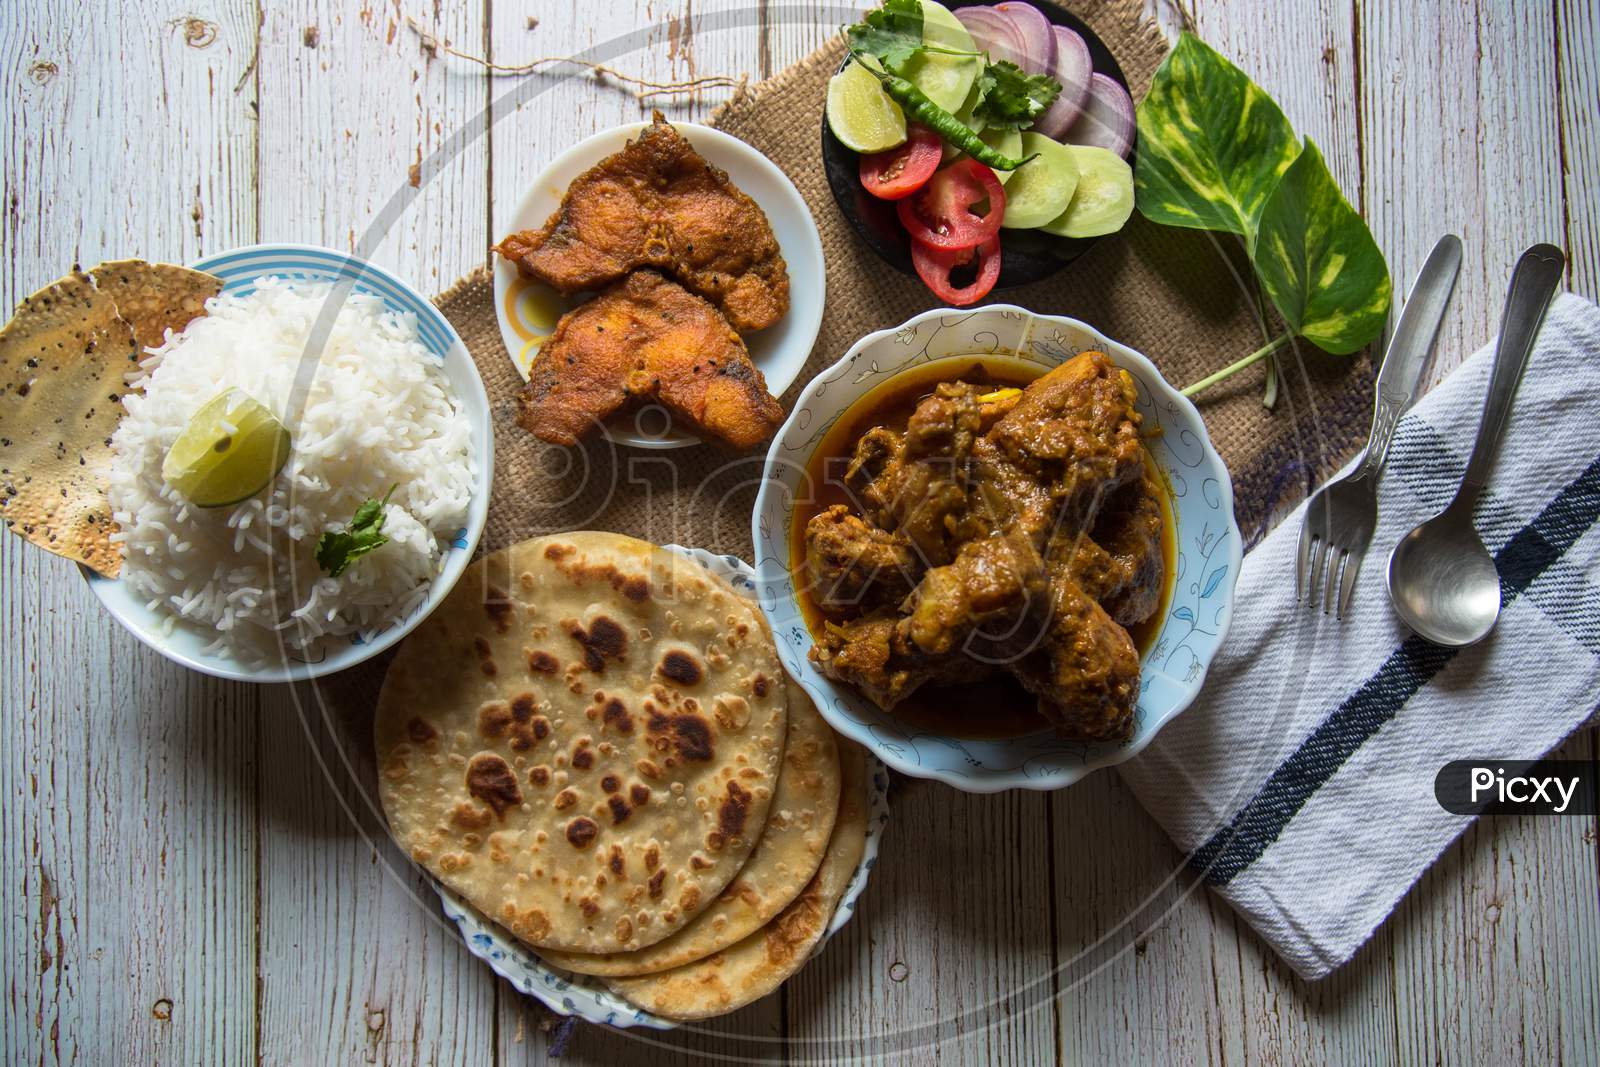 Top view of full Indian meal on a background